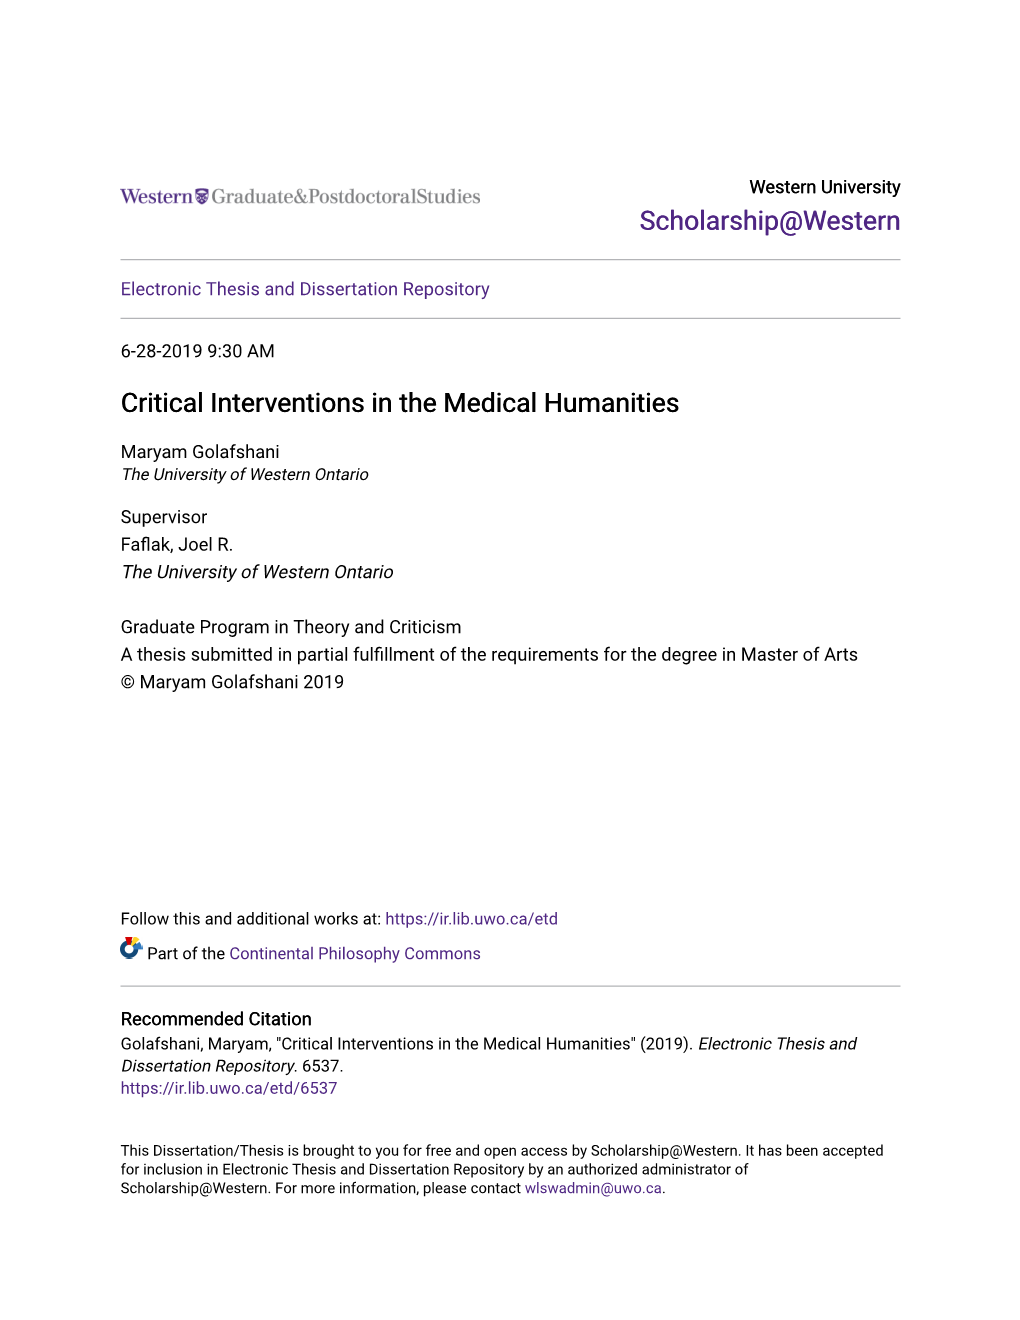 Critical Interventions in the Medical Humanities